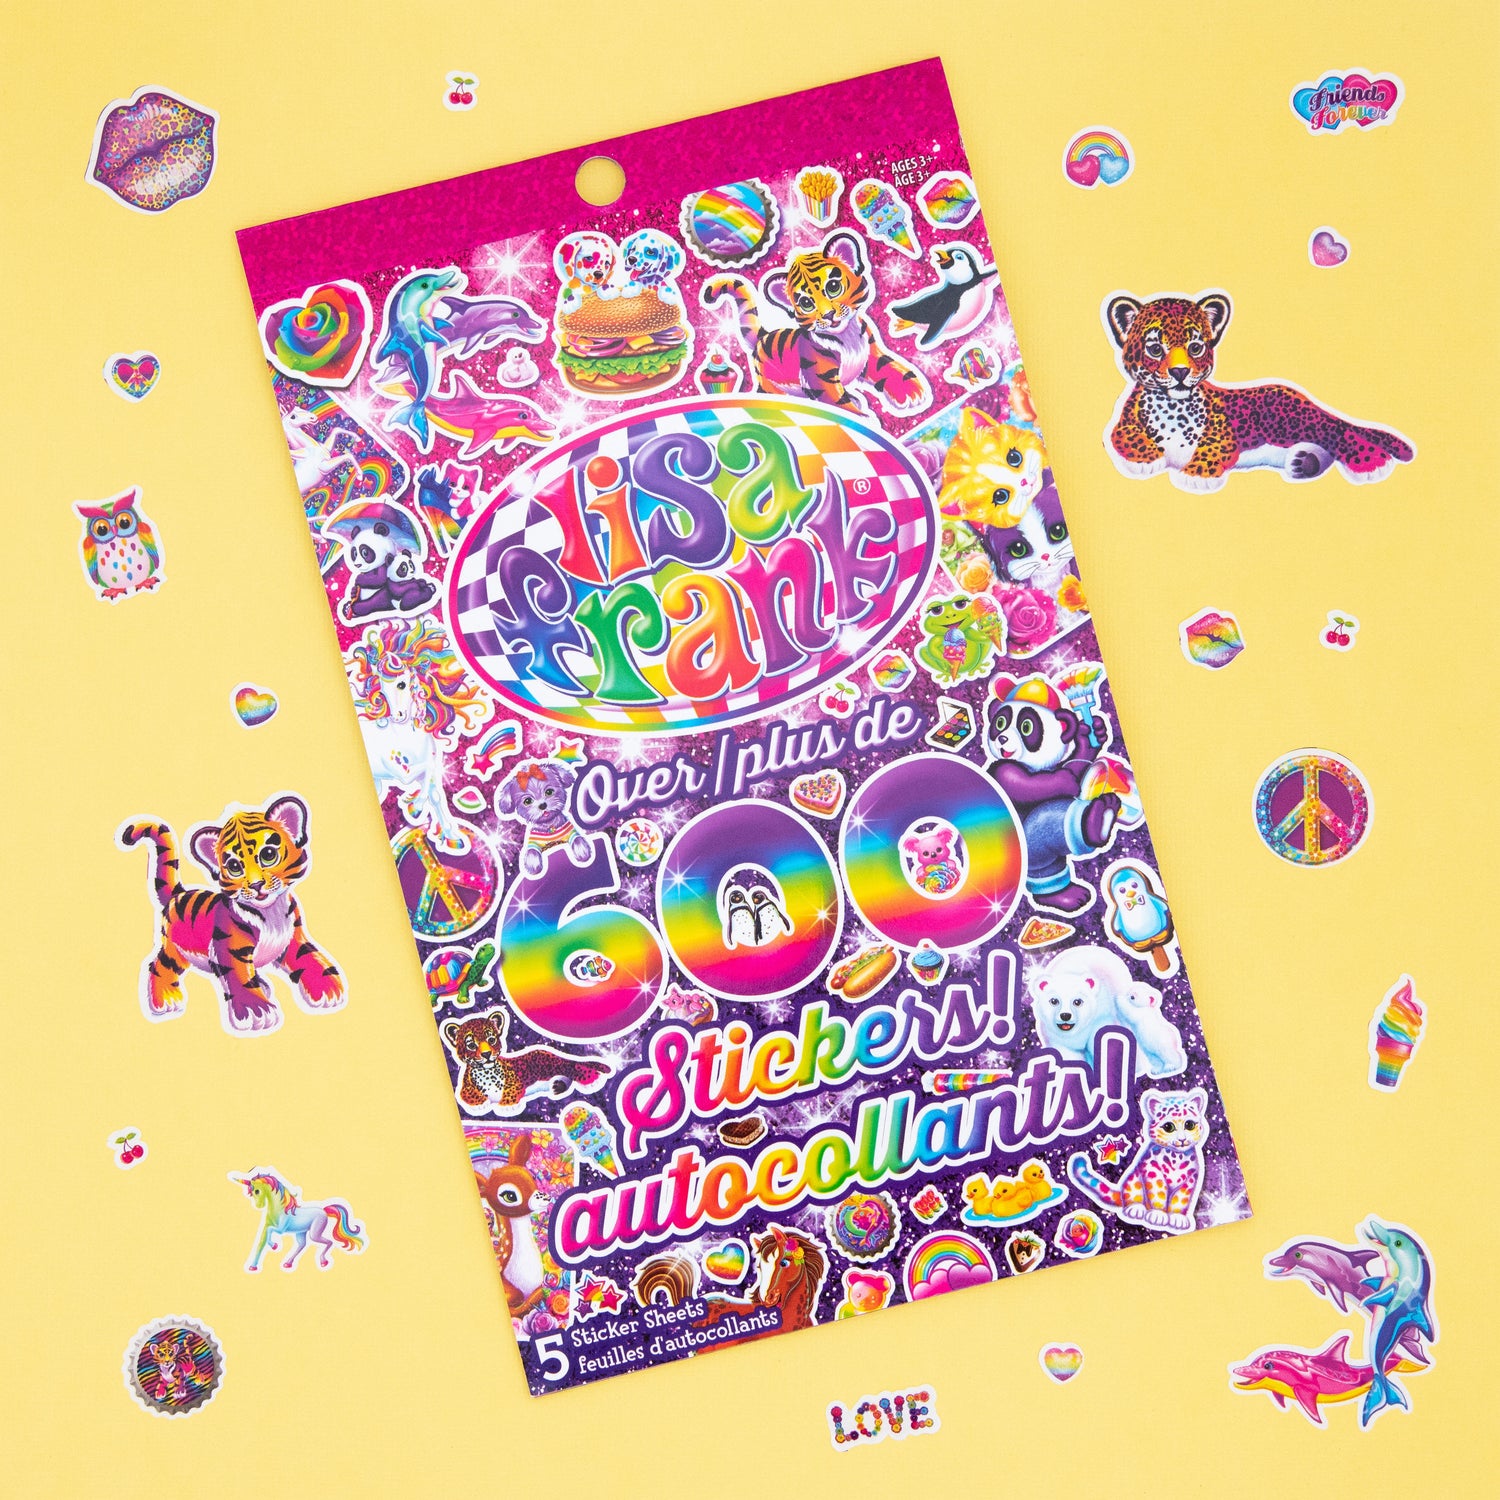 Get creative with a Lisa Frank sticker book from The Oddball Club, featuring 600 stickers including fun and nostalgic 90s designs like rainbow tigers and peace signs.